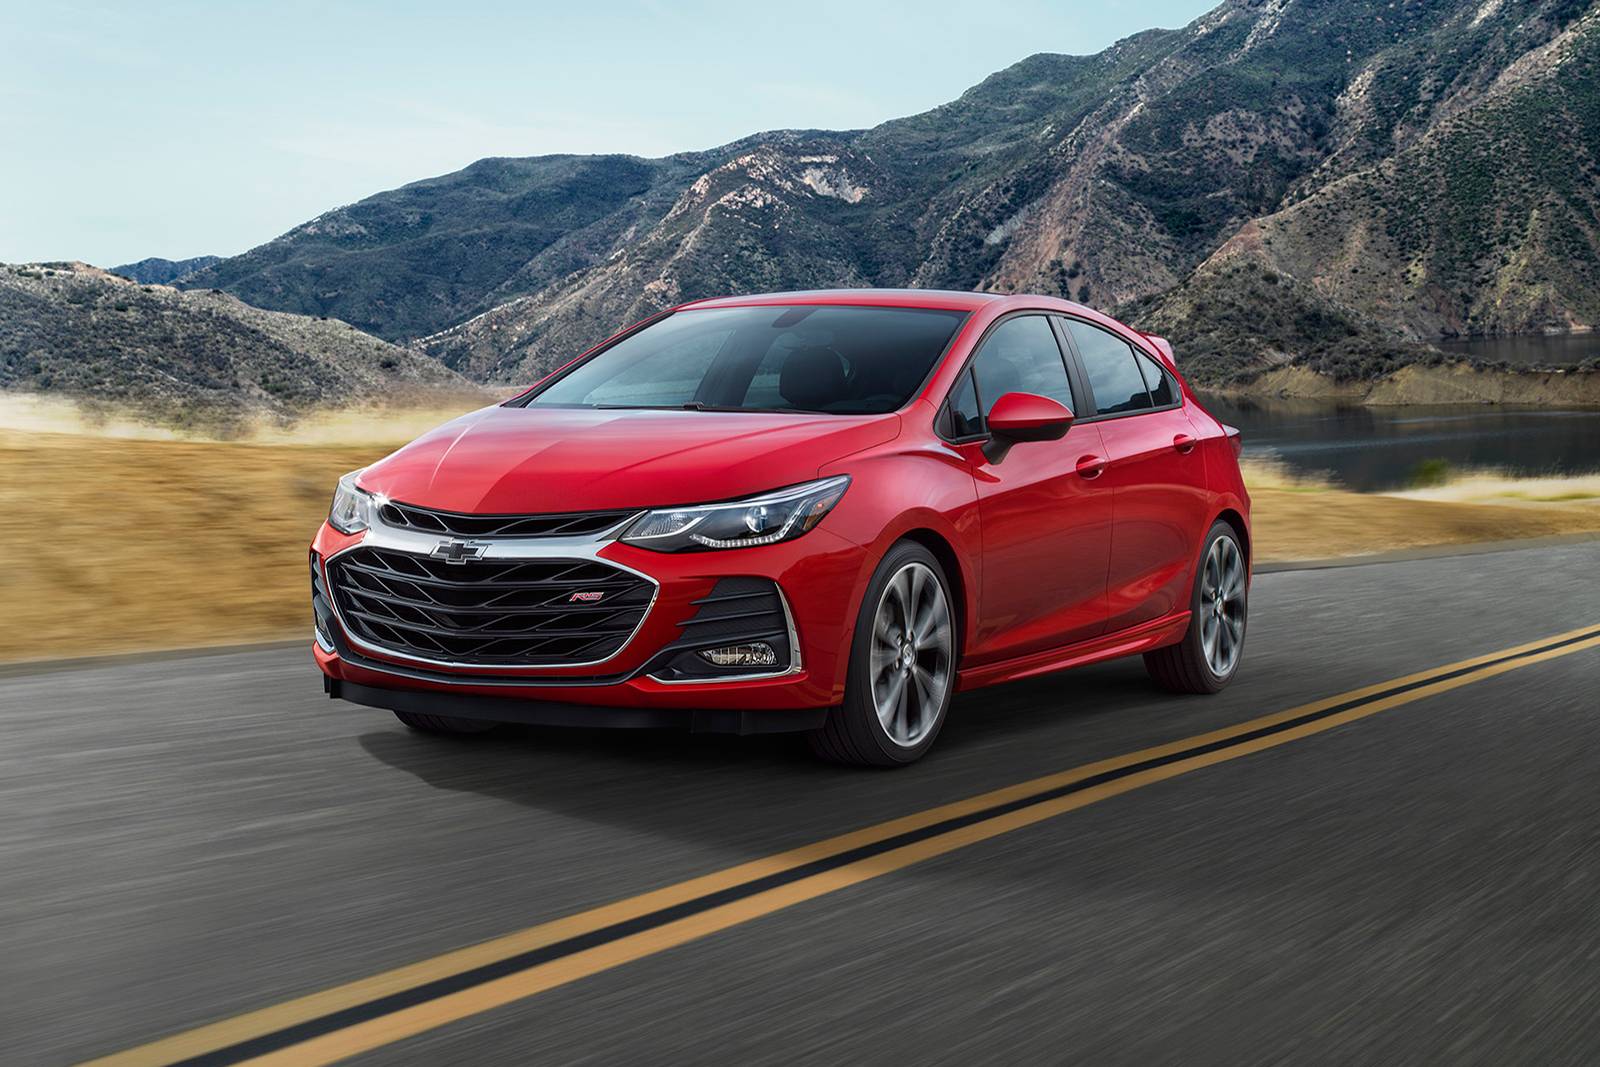 2019 Chevy Cruze Review & Ratings | Edmunds